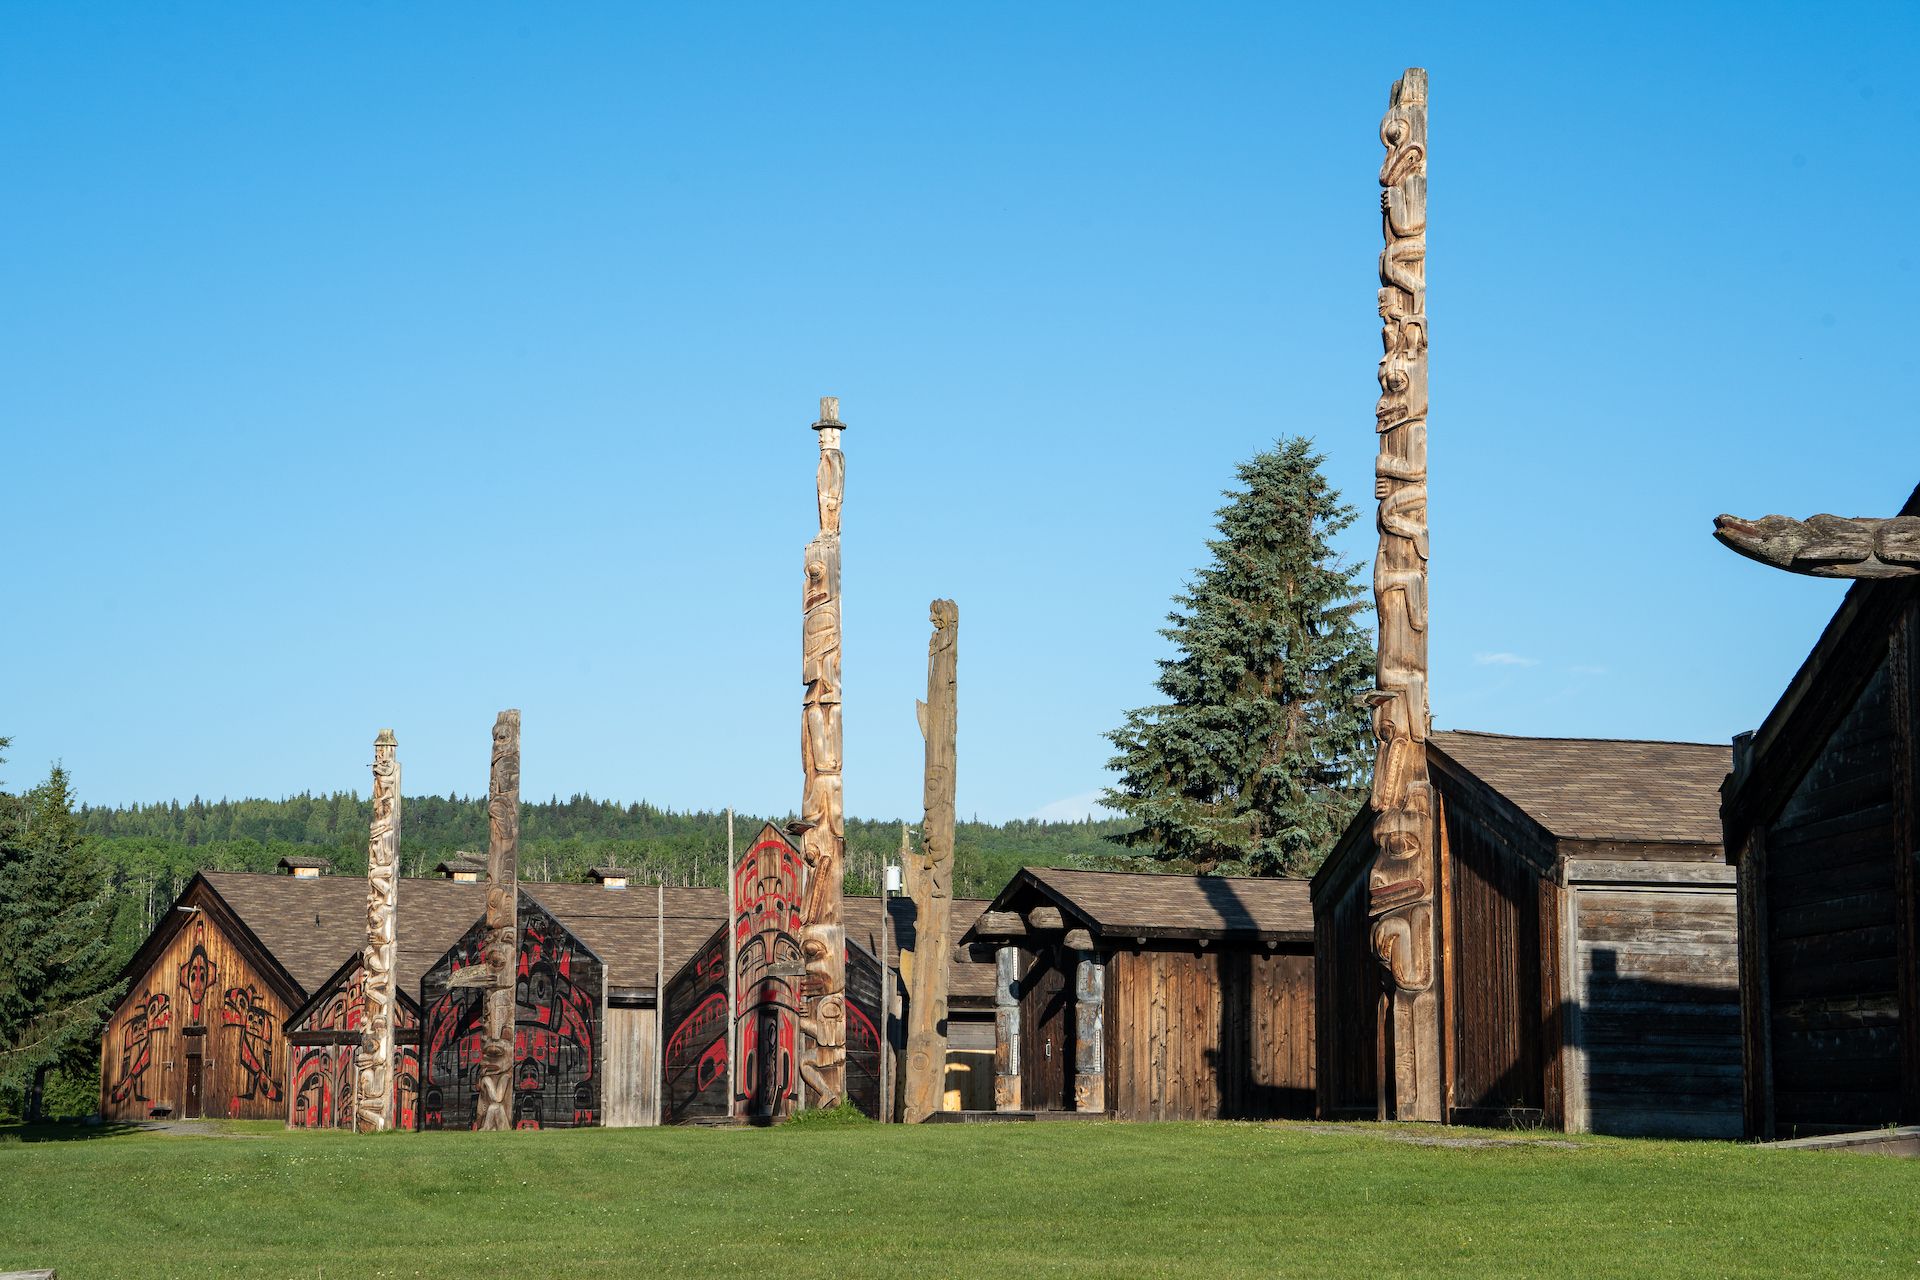 Totem poles are everywhere in the First Nation communities of Northwestern British Colombia